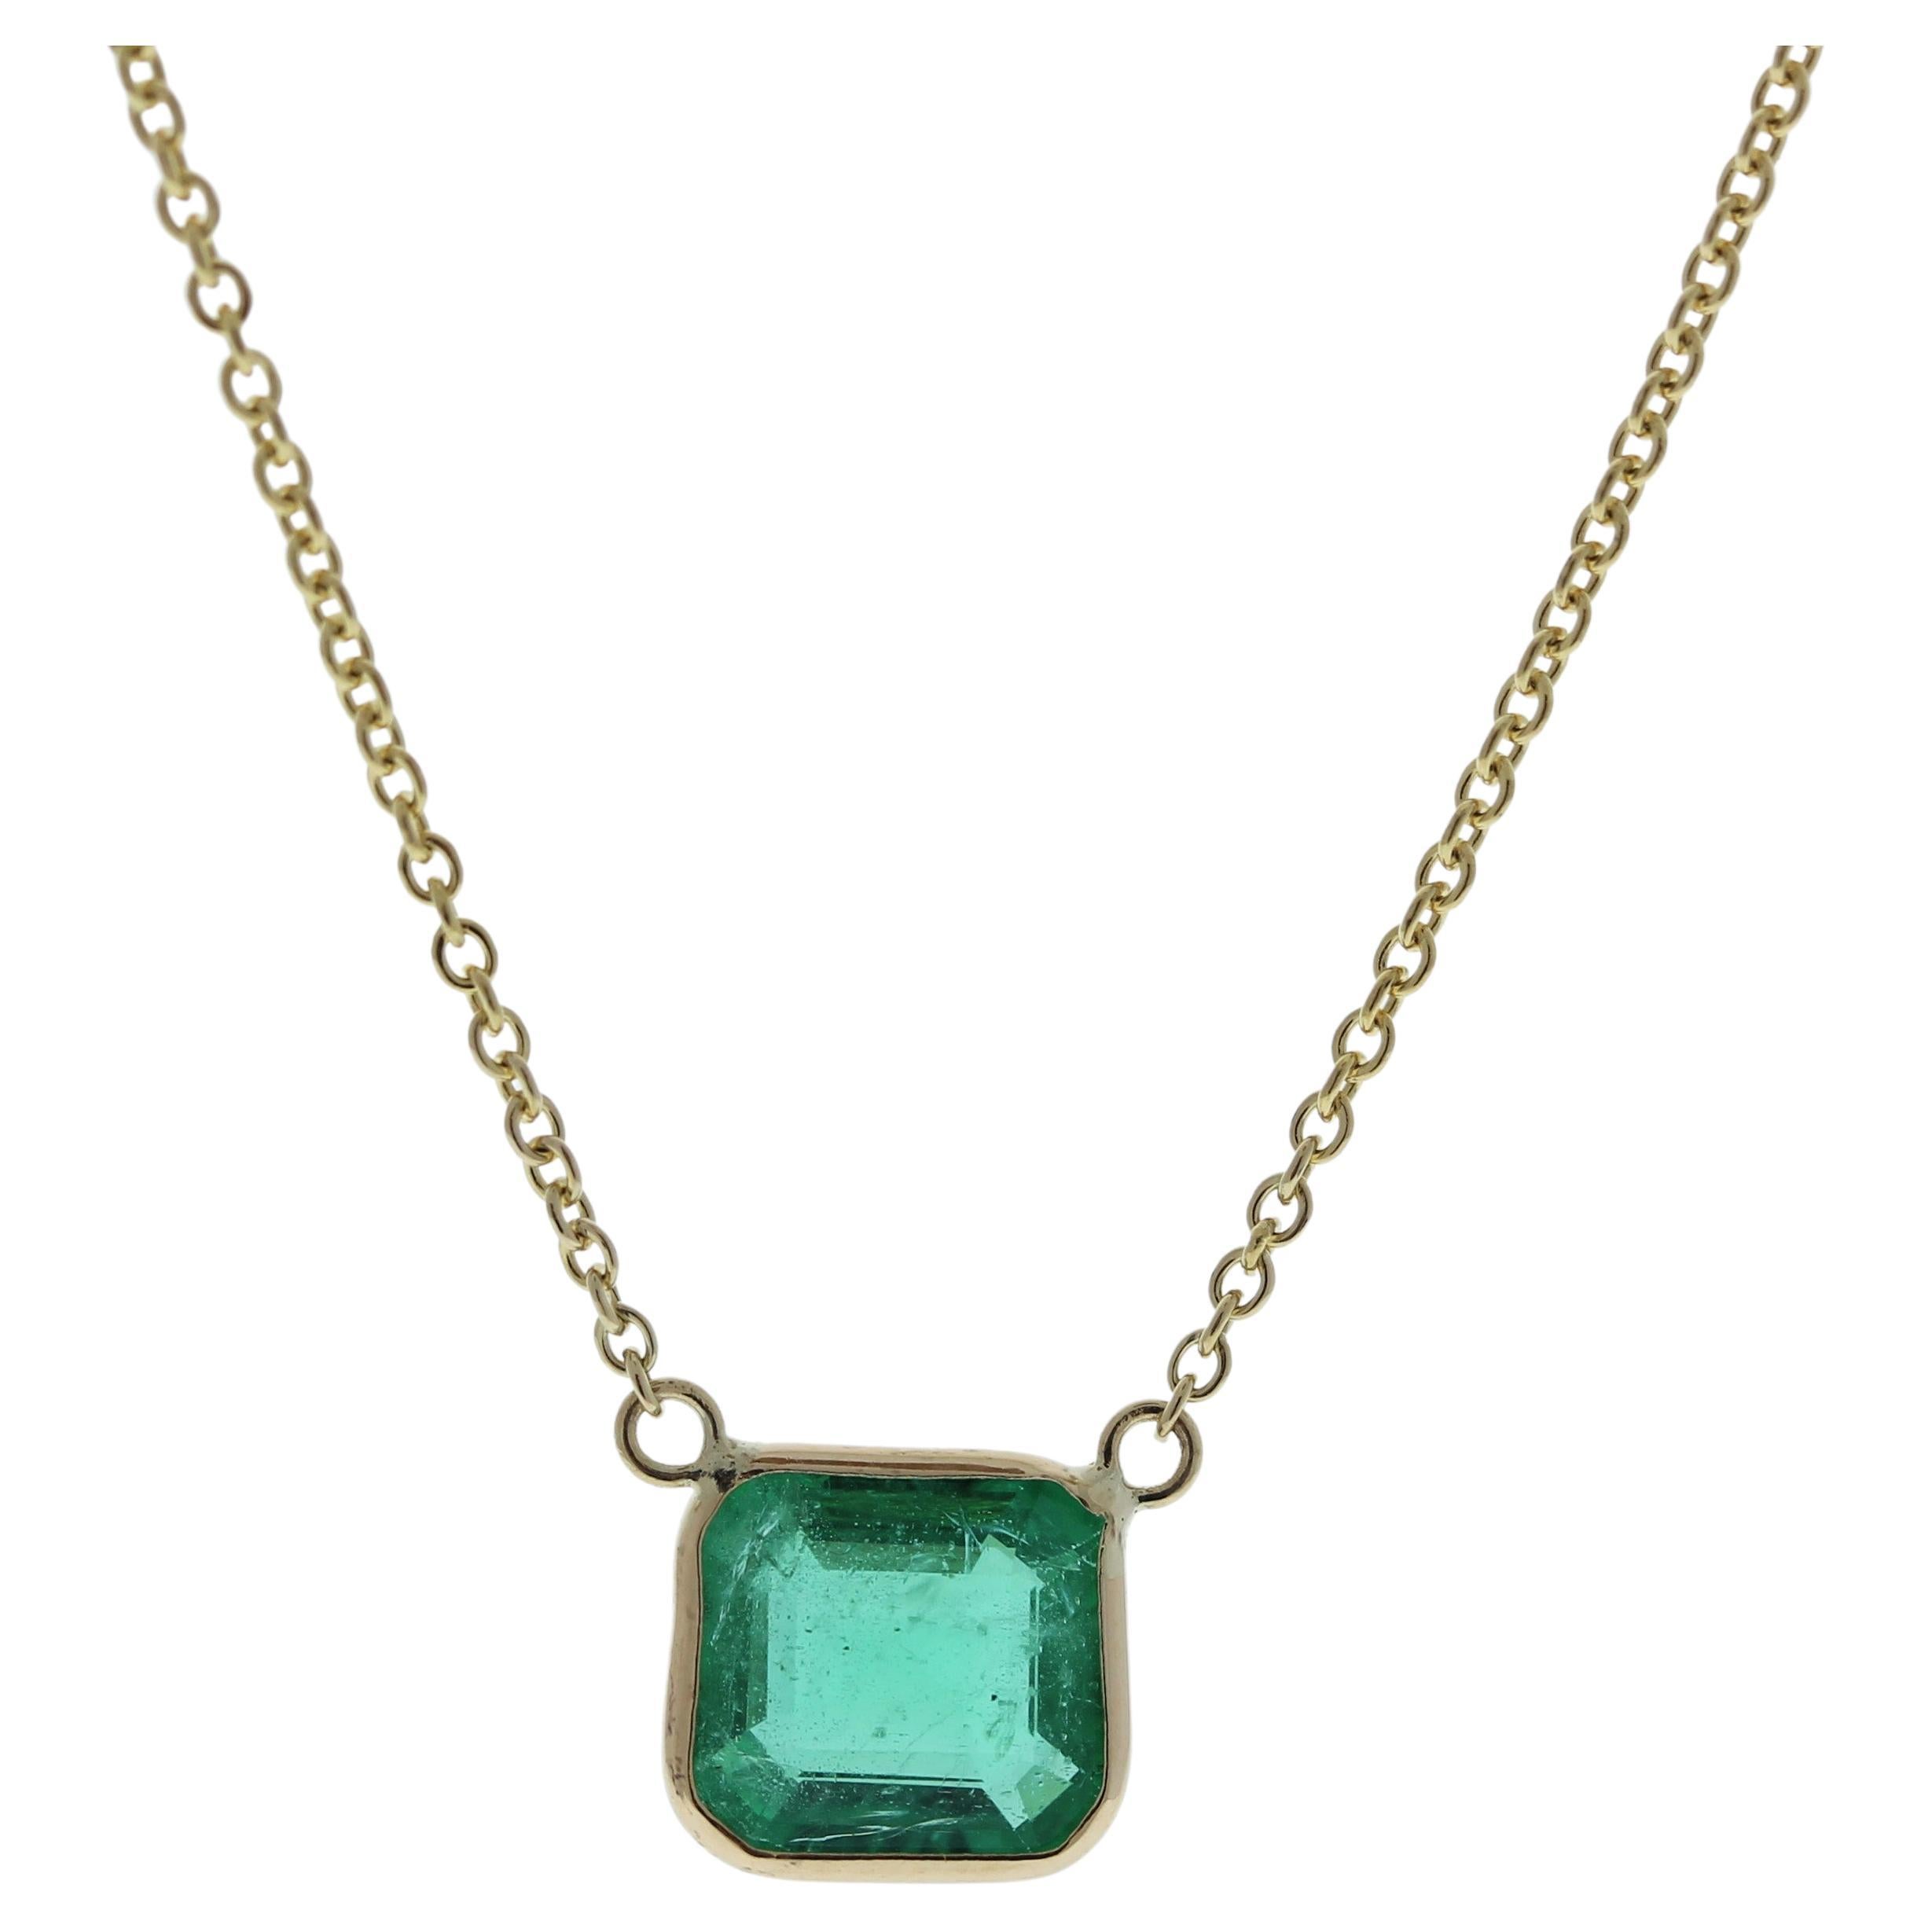 1.57 Carat Asscher Emerald Green Fashion Necklaces In 14k Yellow Gold